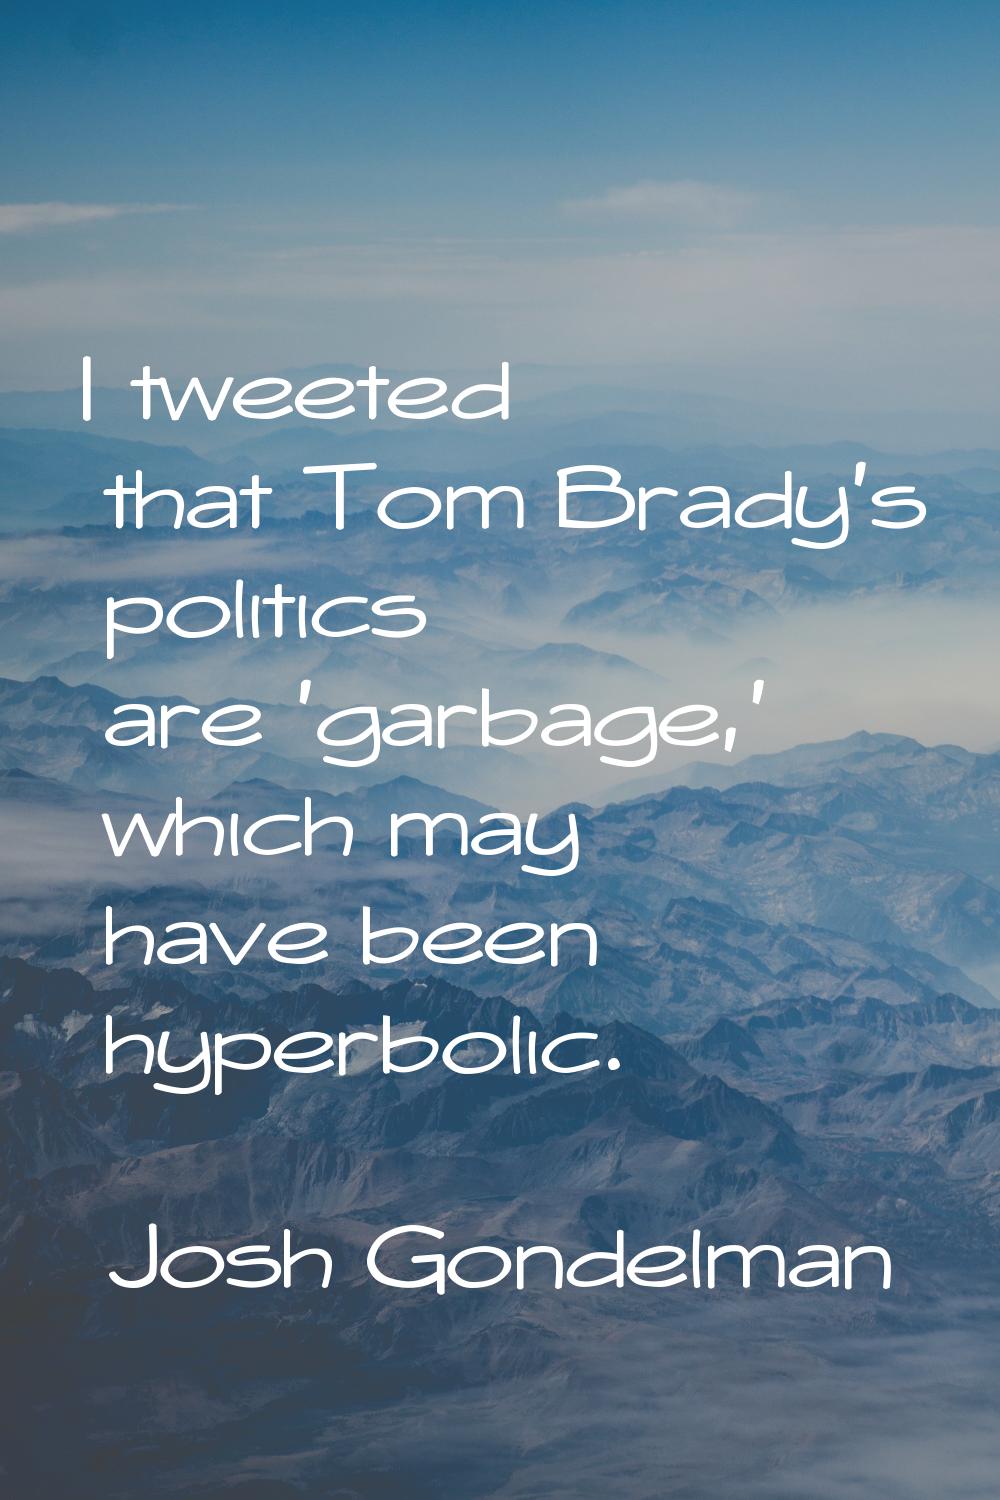 I tweeted that Tom Brady's politics are 'garbage,' which may have been hyperbolic.